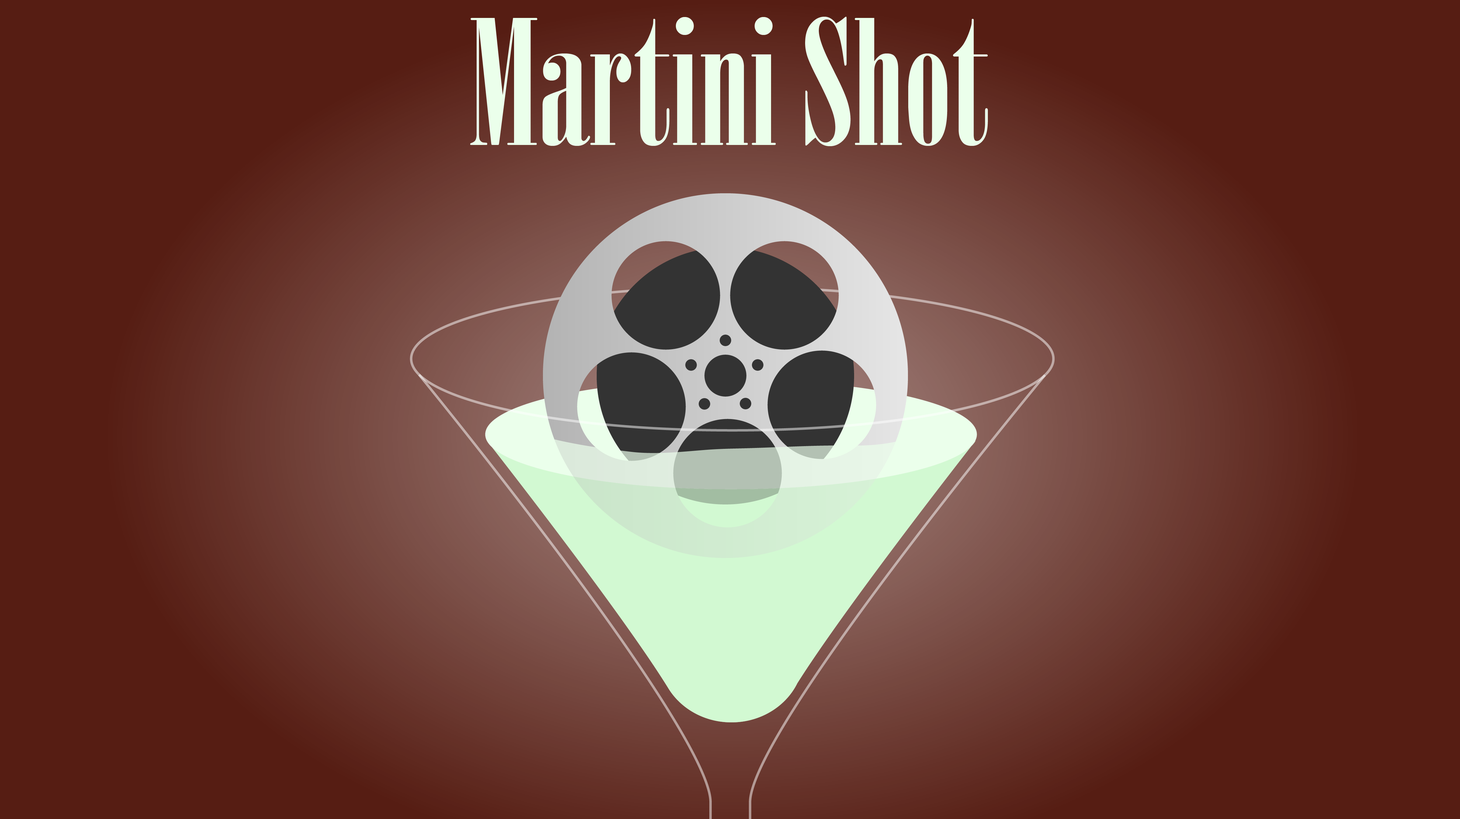 On today’s Martini Shot, we sort out the difference between writers who are good with story and writers who are good with jokes, and actors who can sing but aren’t singers, and what you need to do to stay employed.